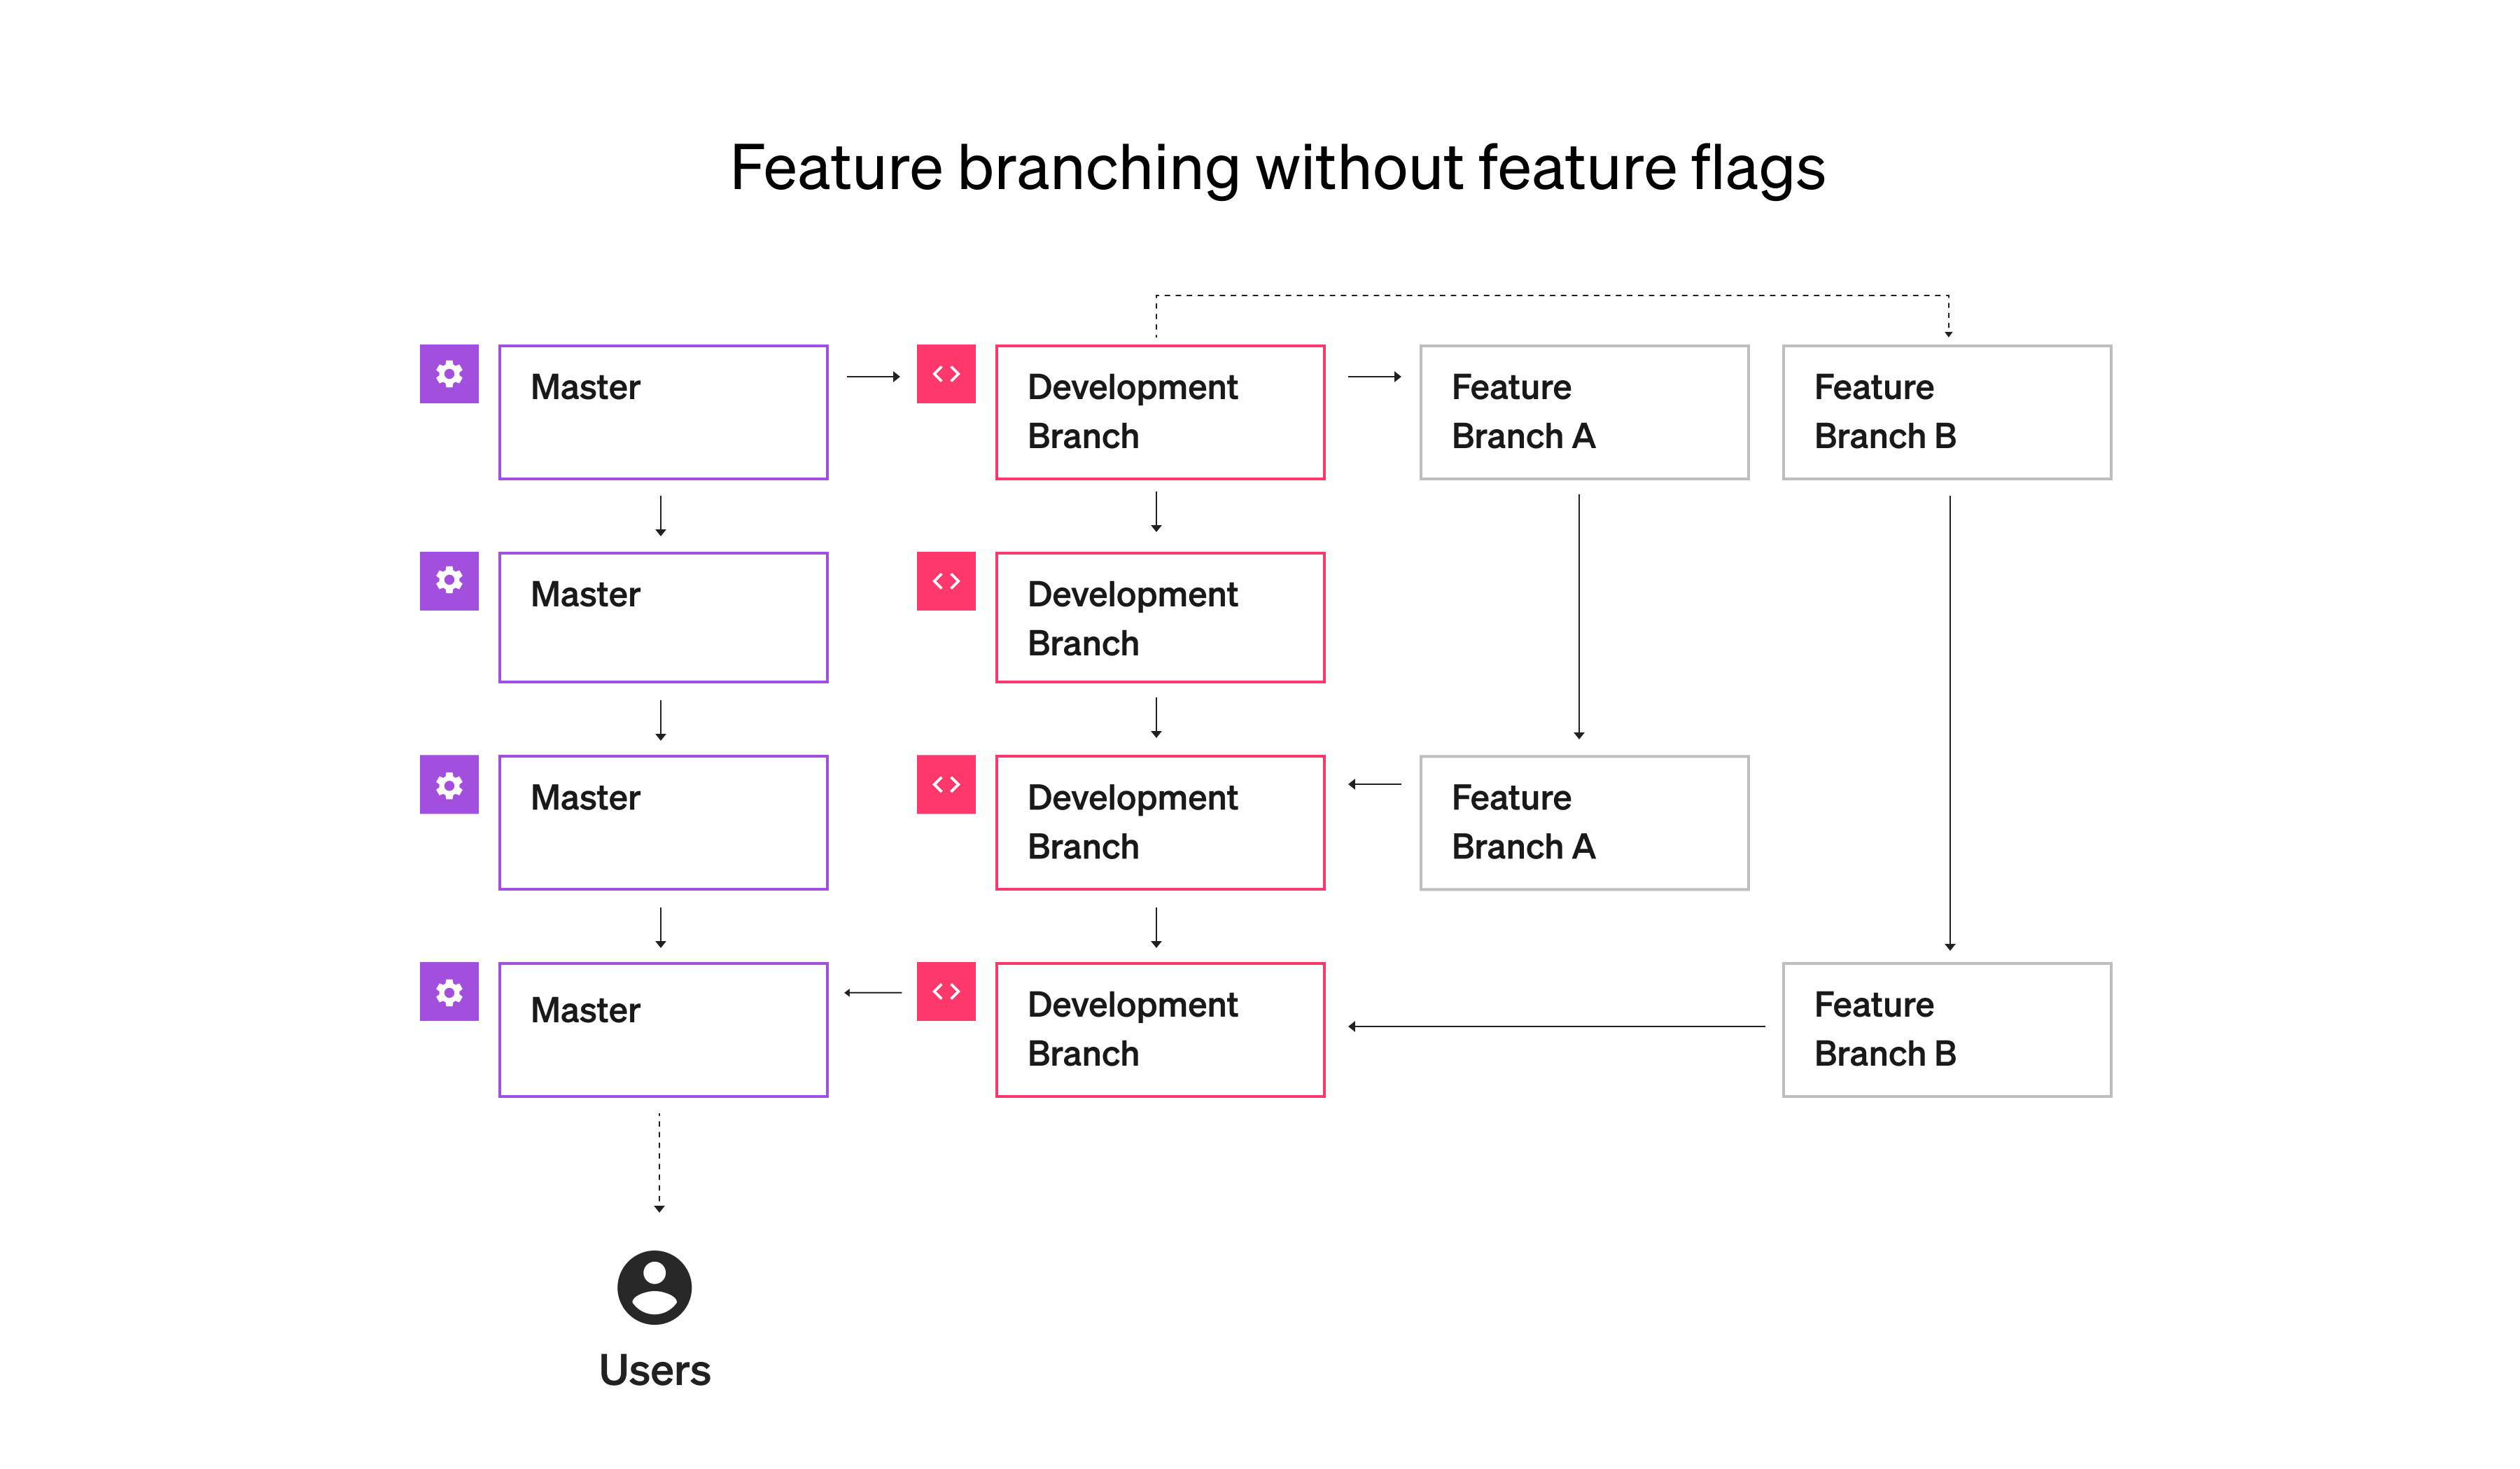 Feature branching without feature flags